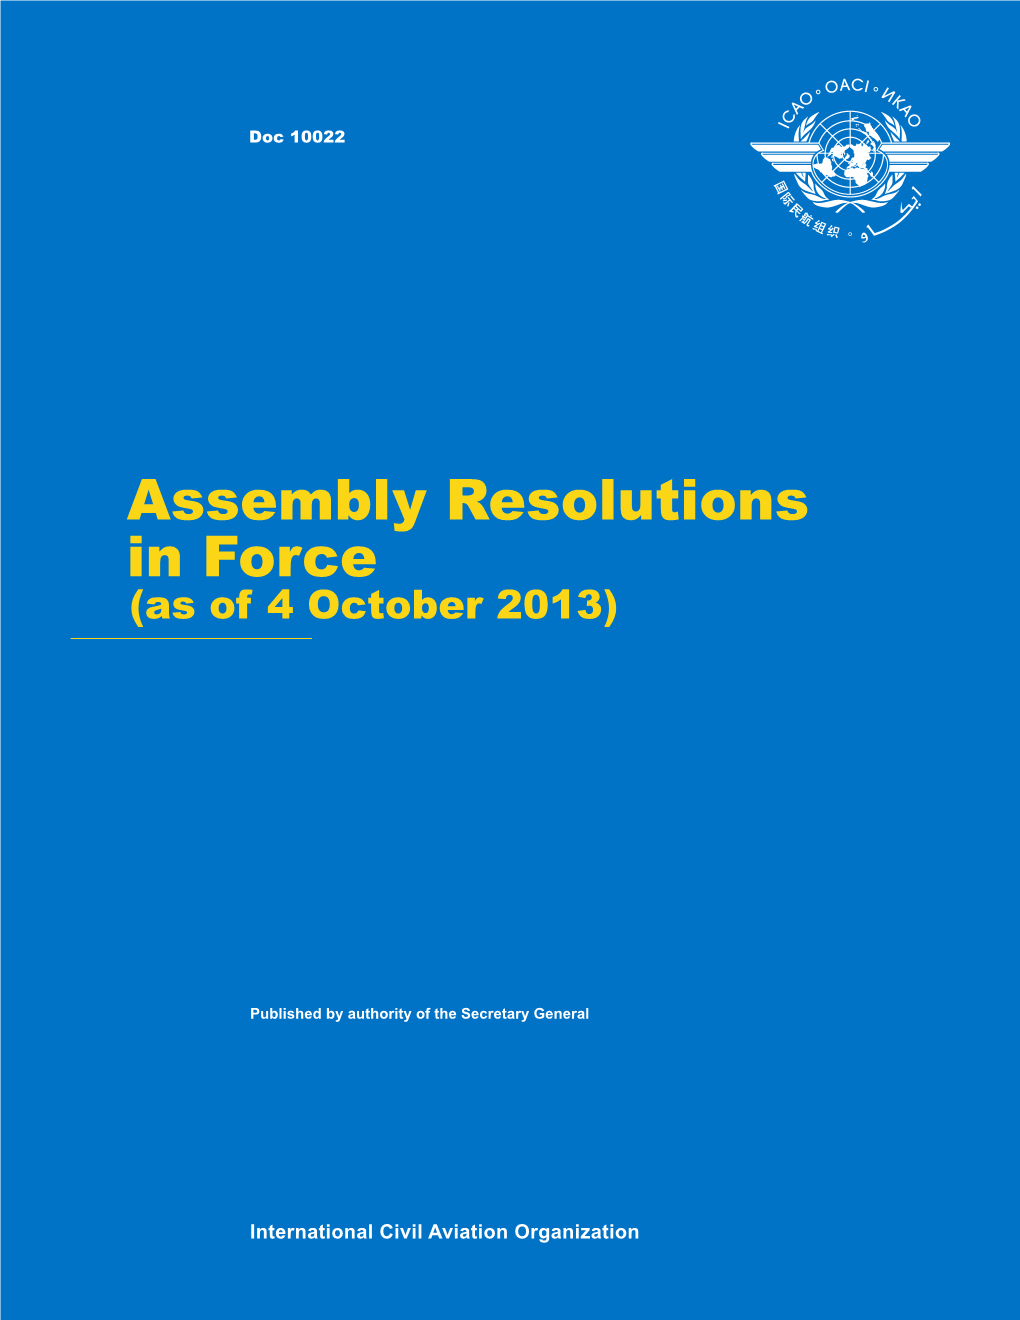 Assembly Resolutions in Force (As of 4 October 2013)